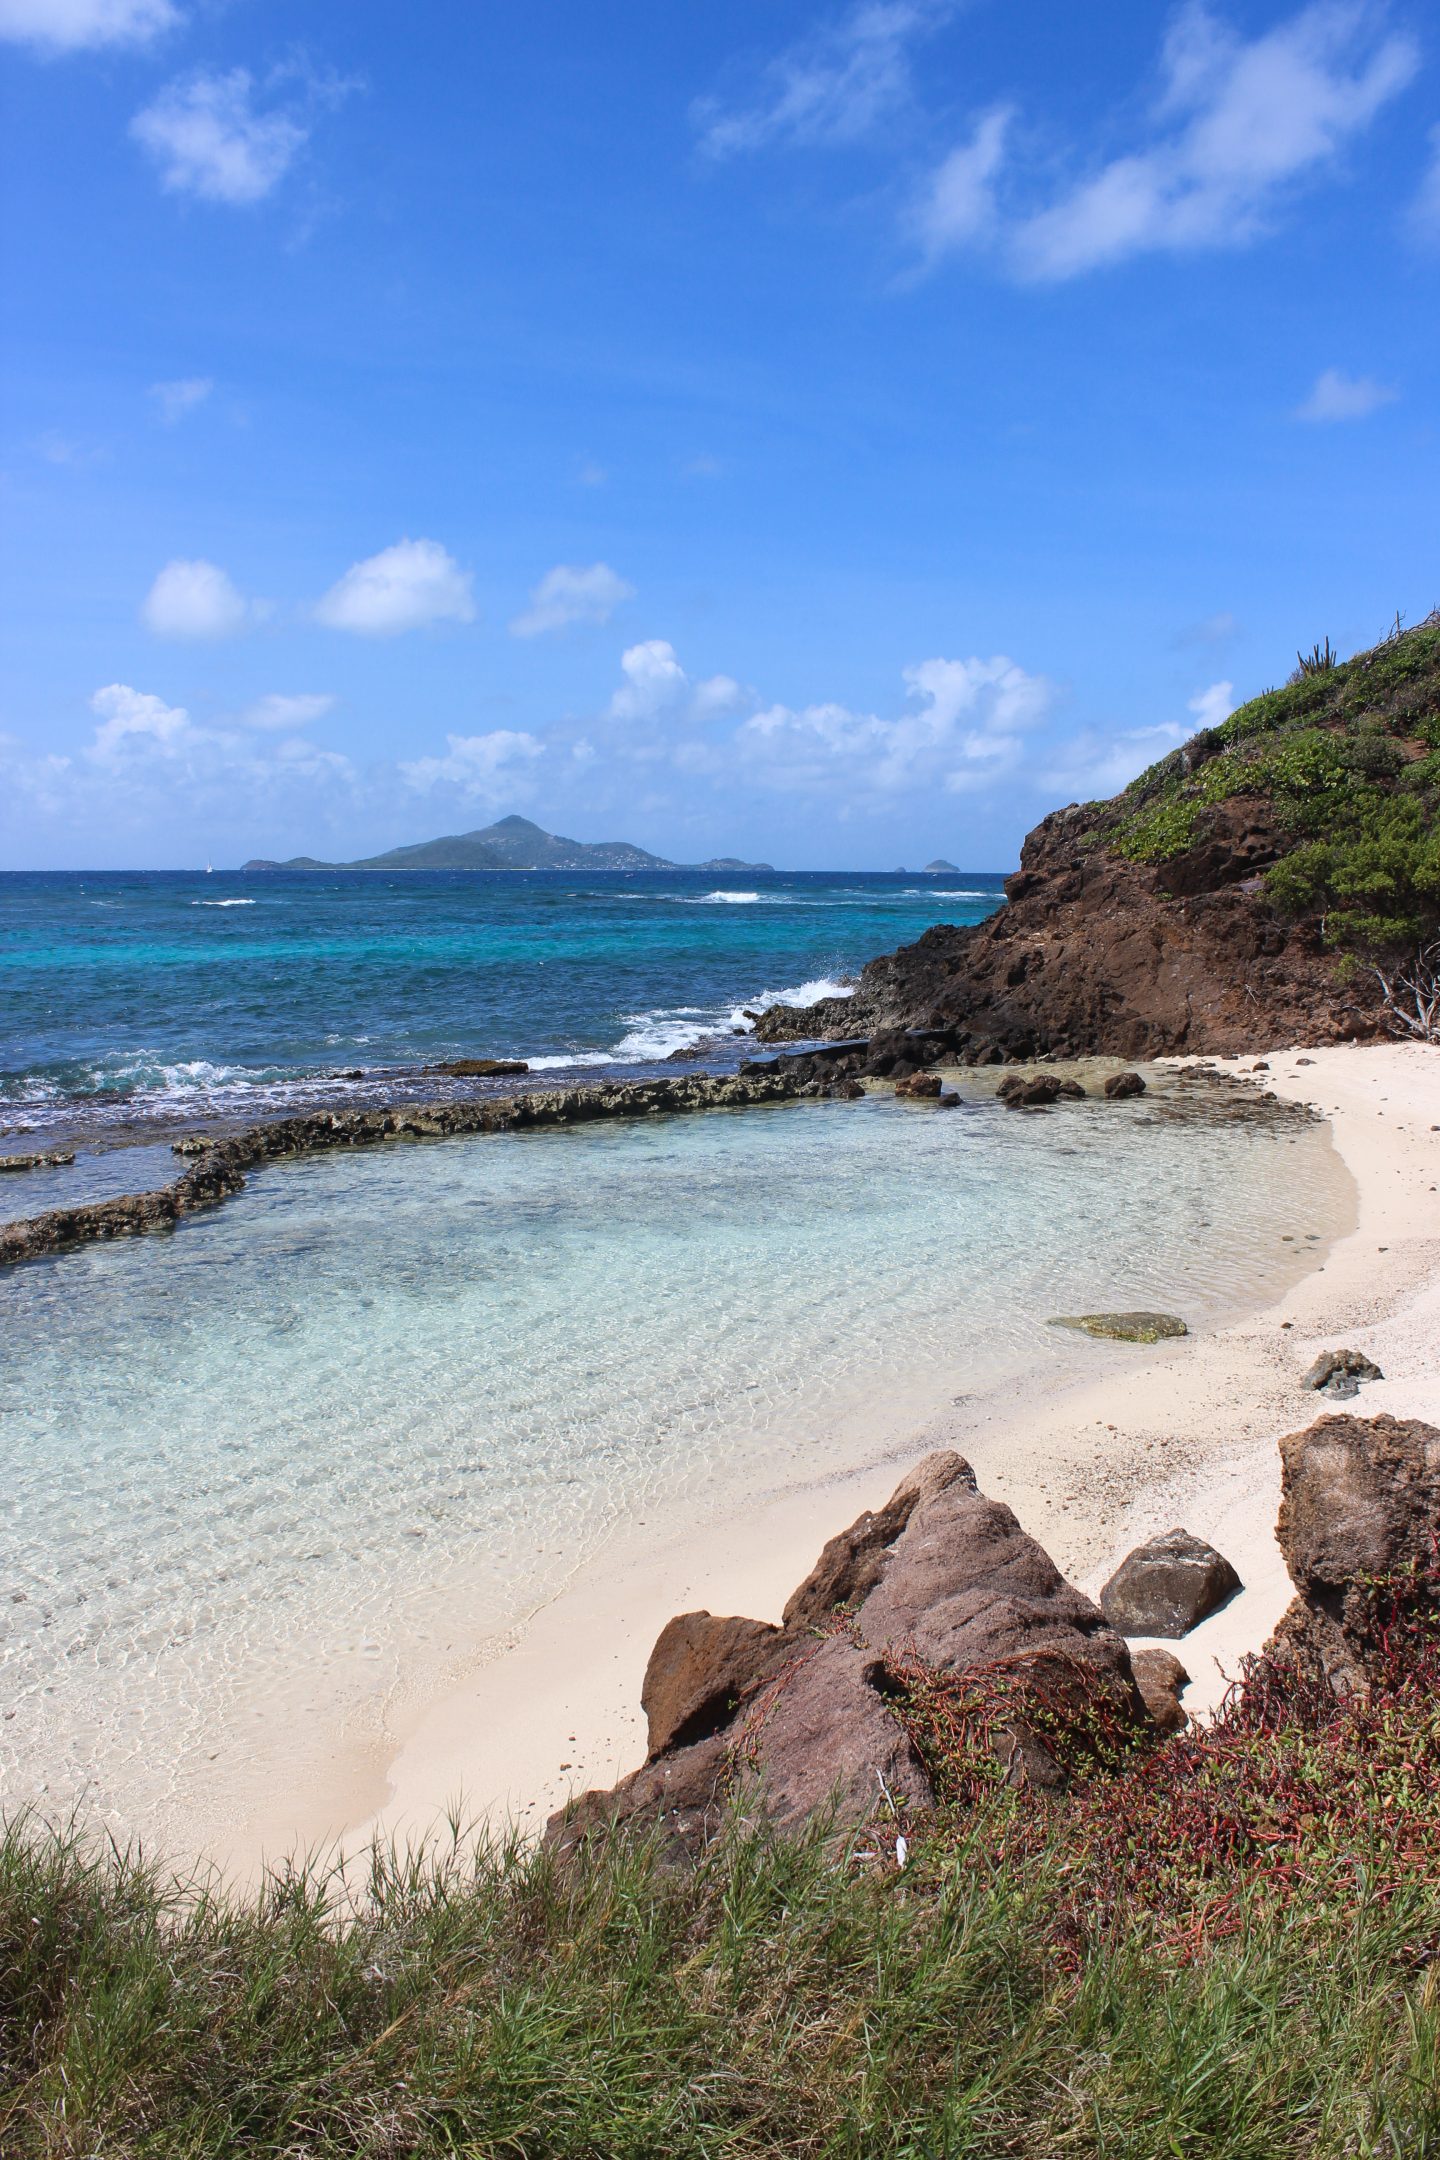 Clutch and carry on - UK Travel blogger - palm island resort, grenadines (349 of 361)